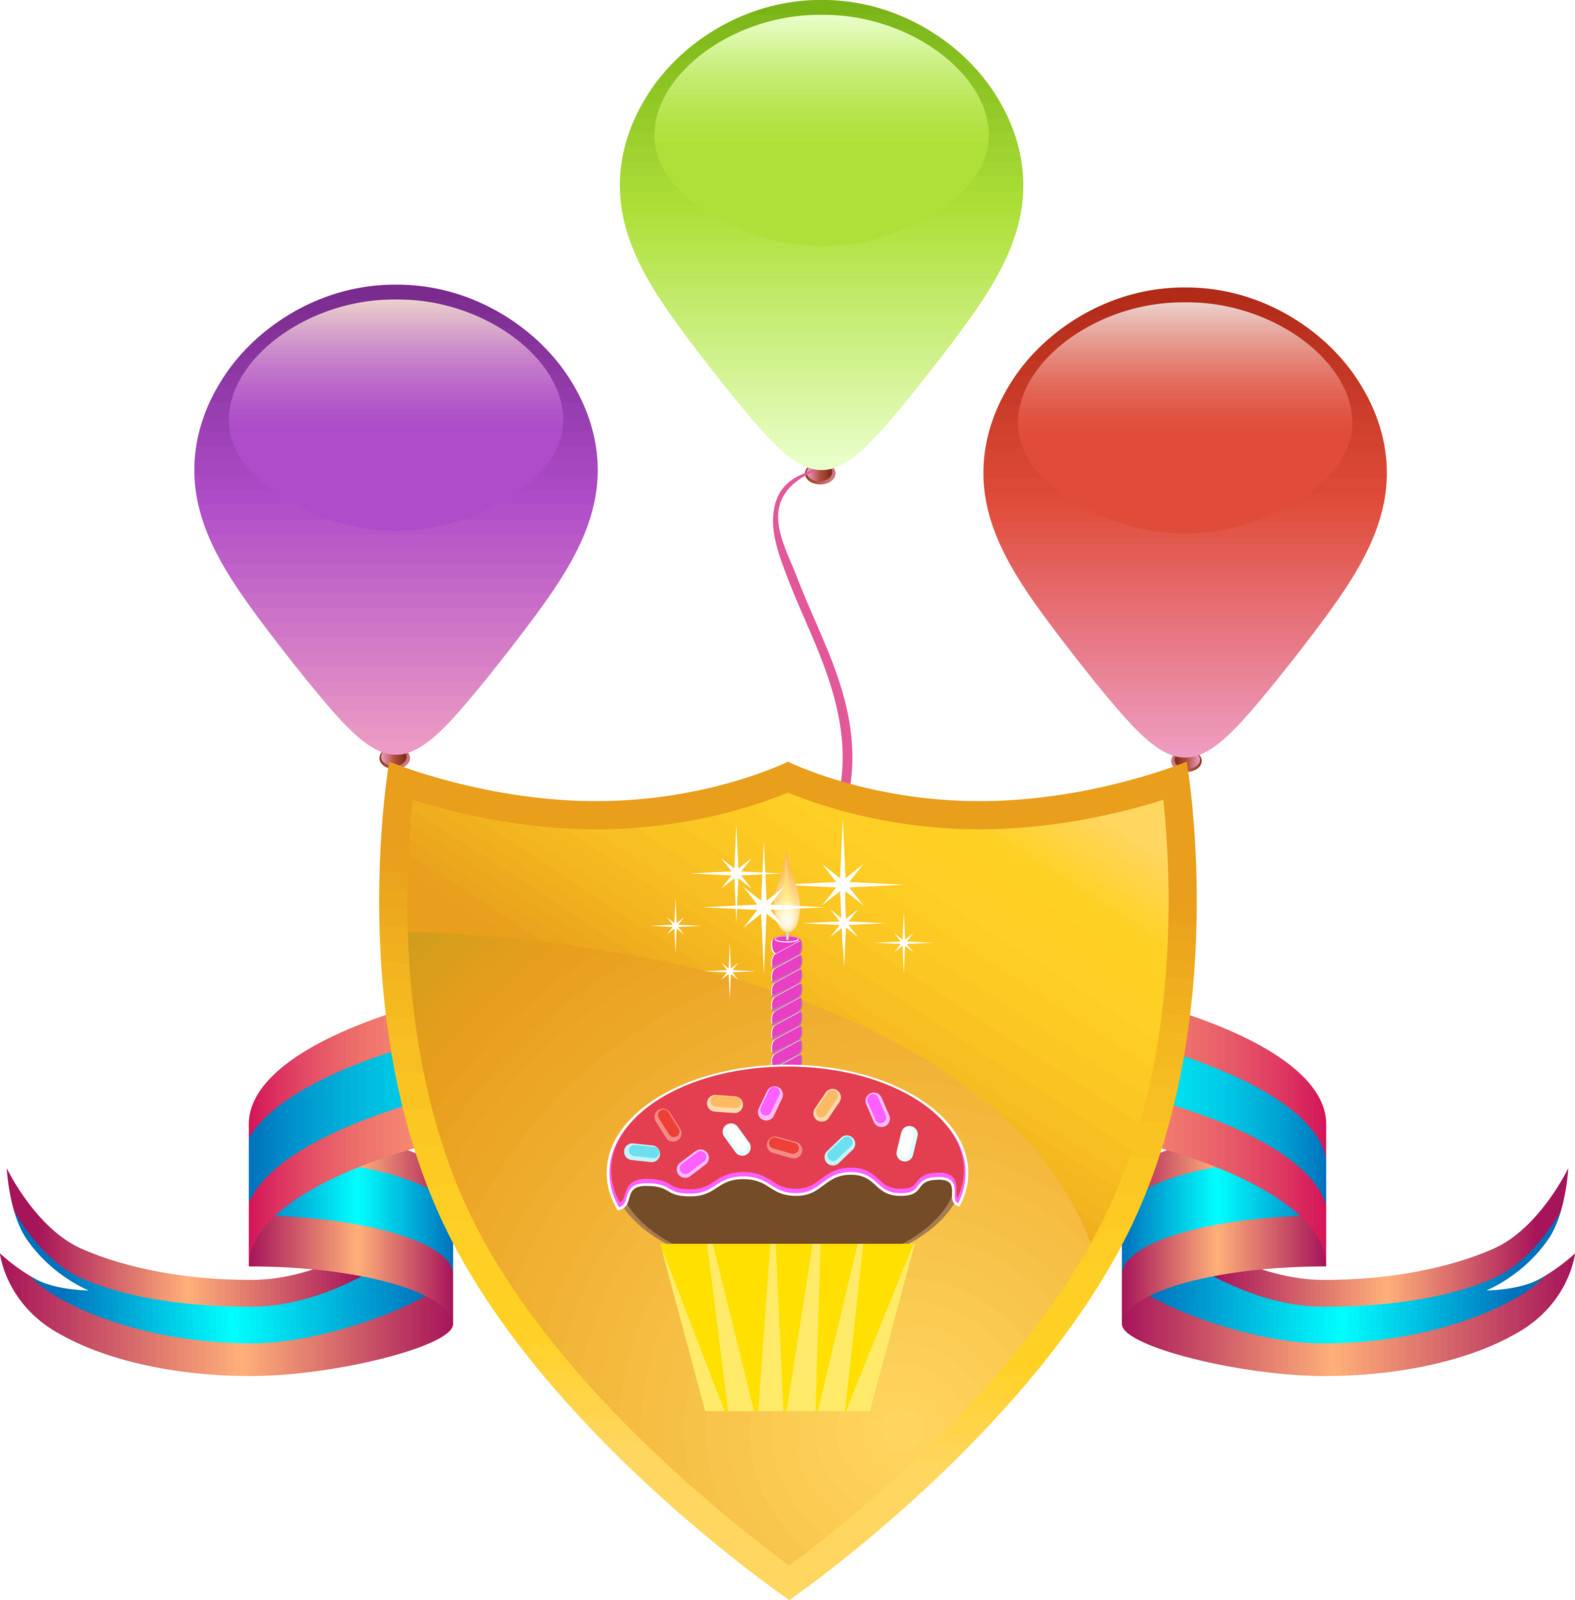 Cupcake Balloon Crest by cteconsulting